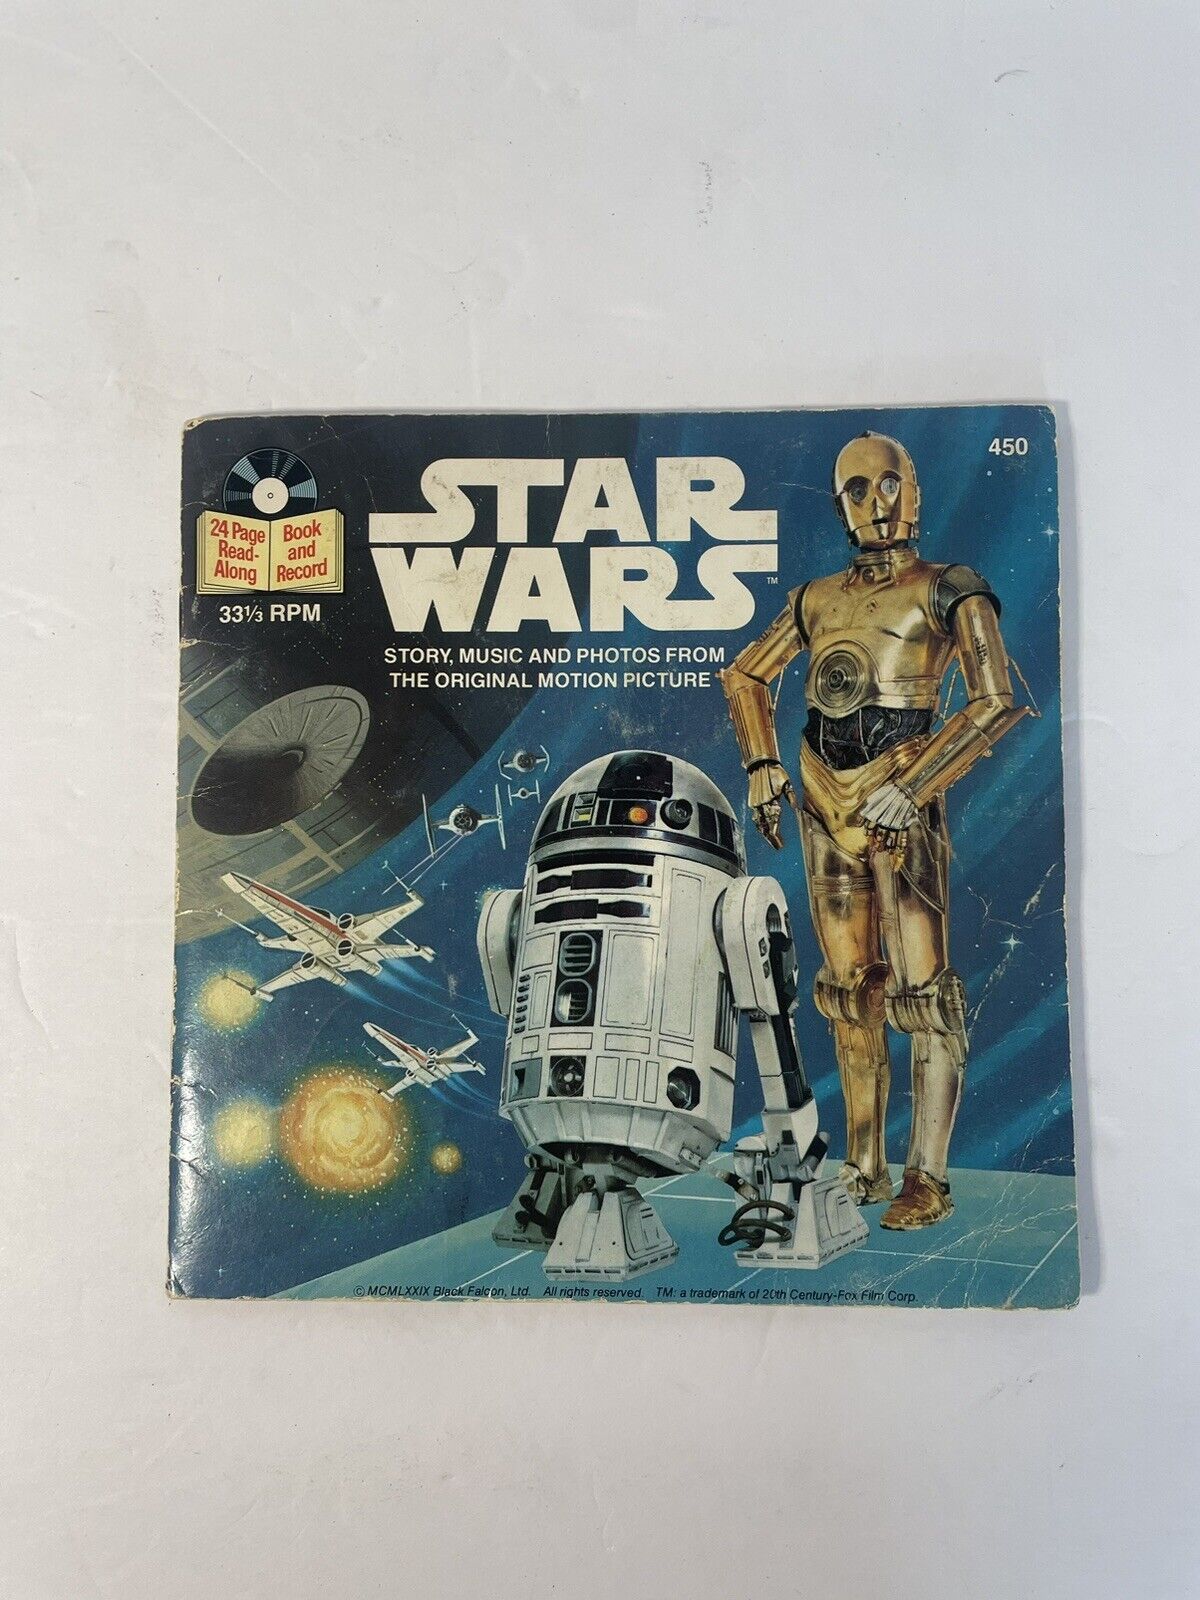 Vintage Star Wars - Read Along Book and Record #450 Vinyl Record 1980, one owner